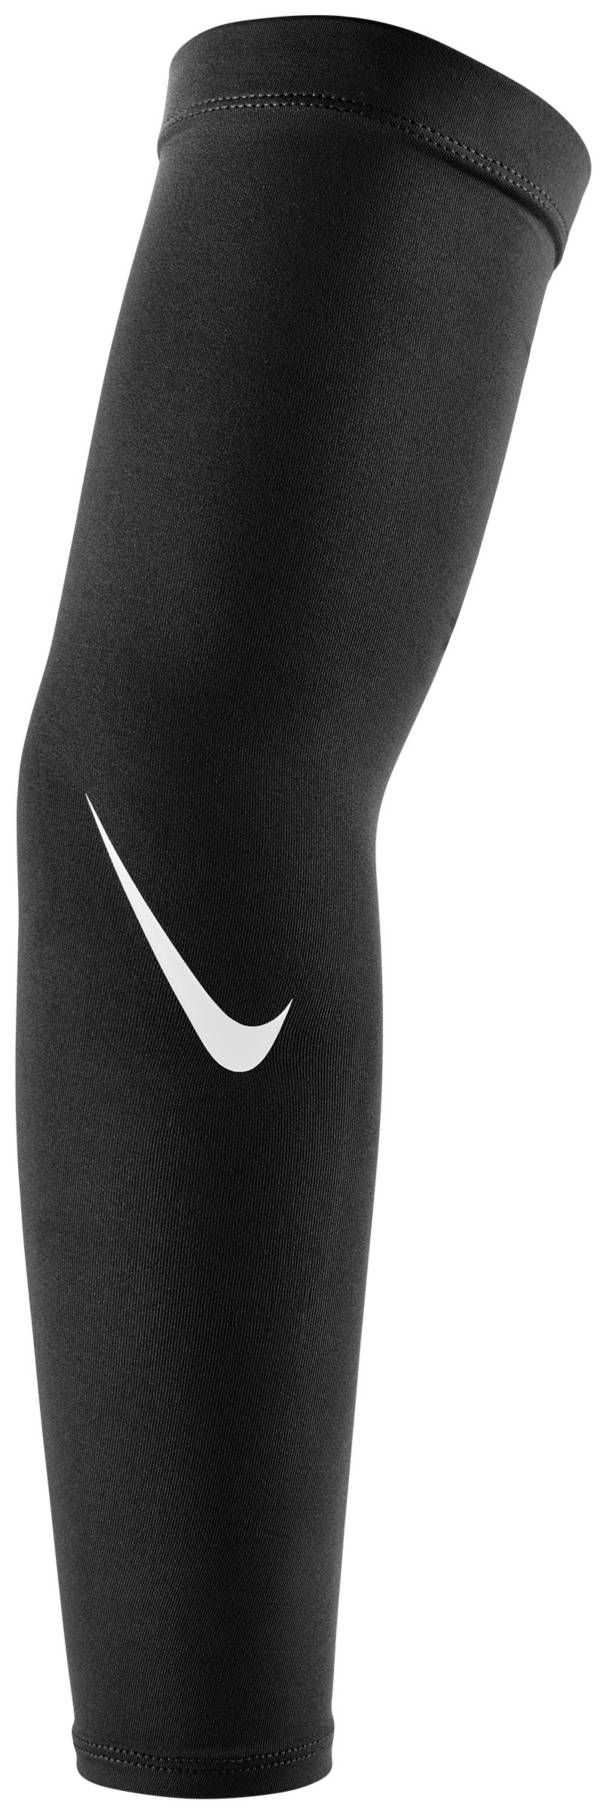 Nike Pro Adult Dri Fit 4 0 Arm Sleeves Dick S Sporting Goods